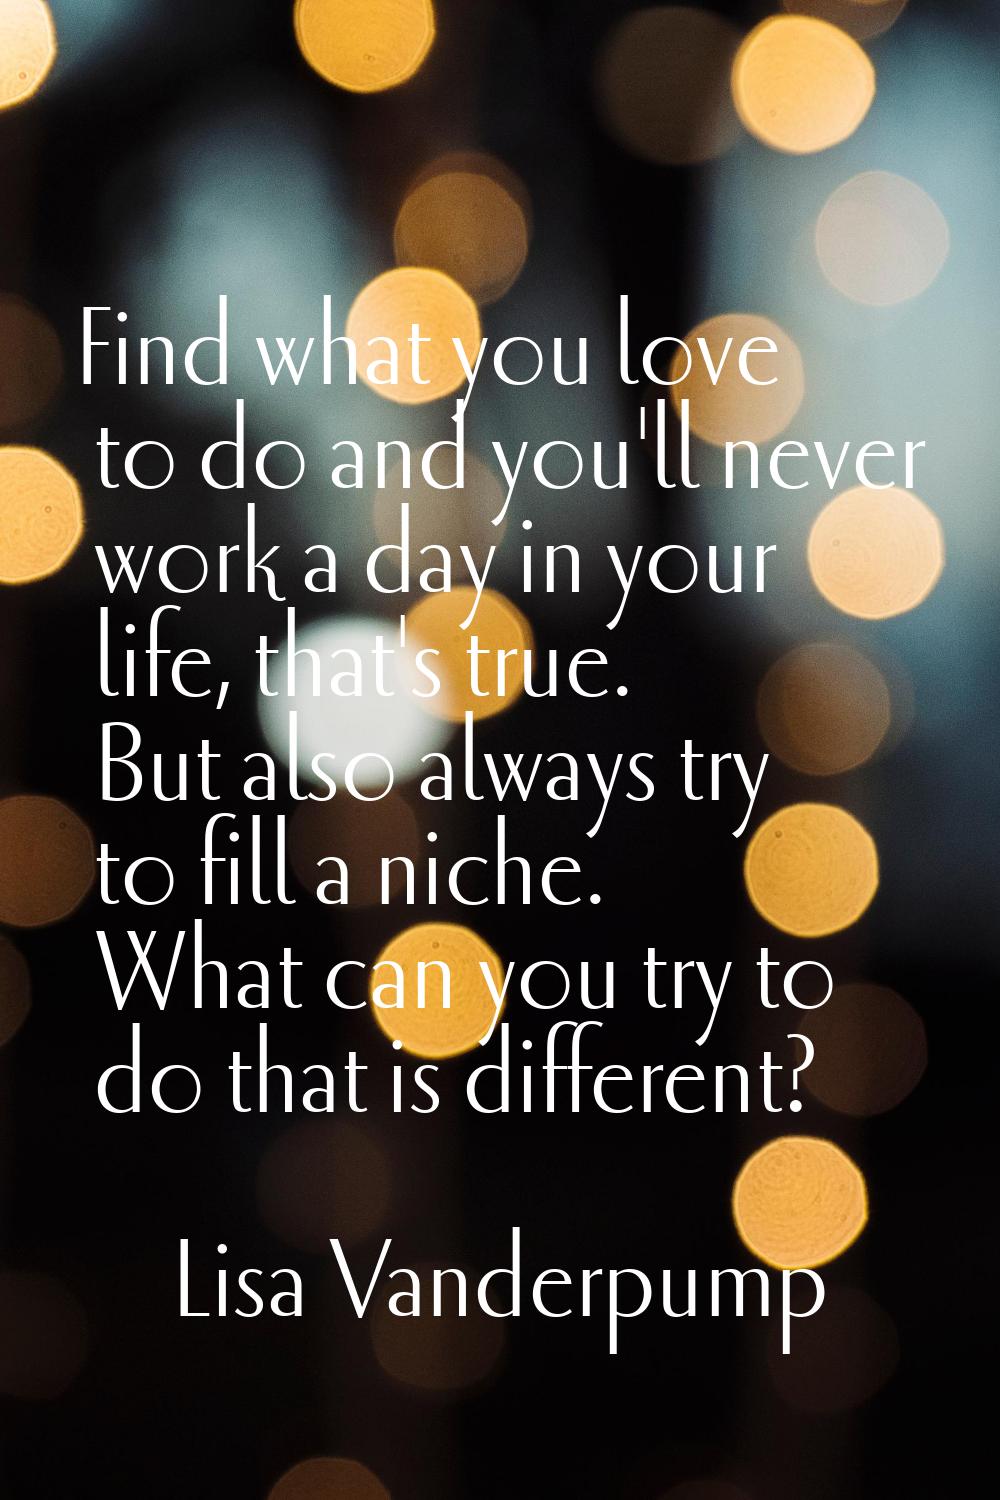 Find what you love to do and you'll never work a day in your life, that's true. But also always try